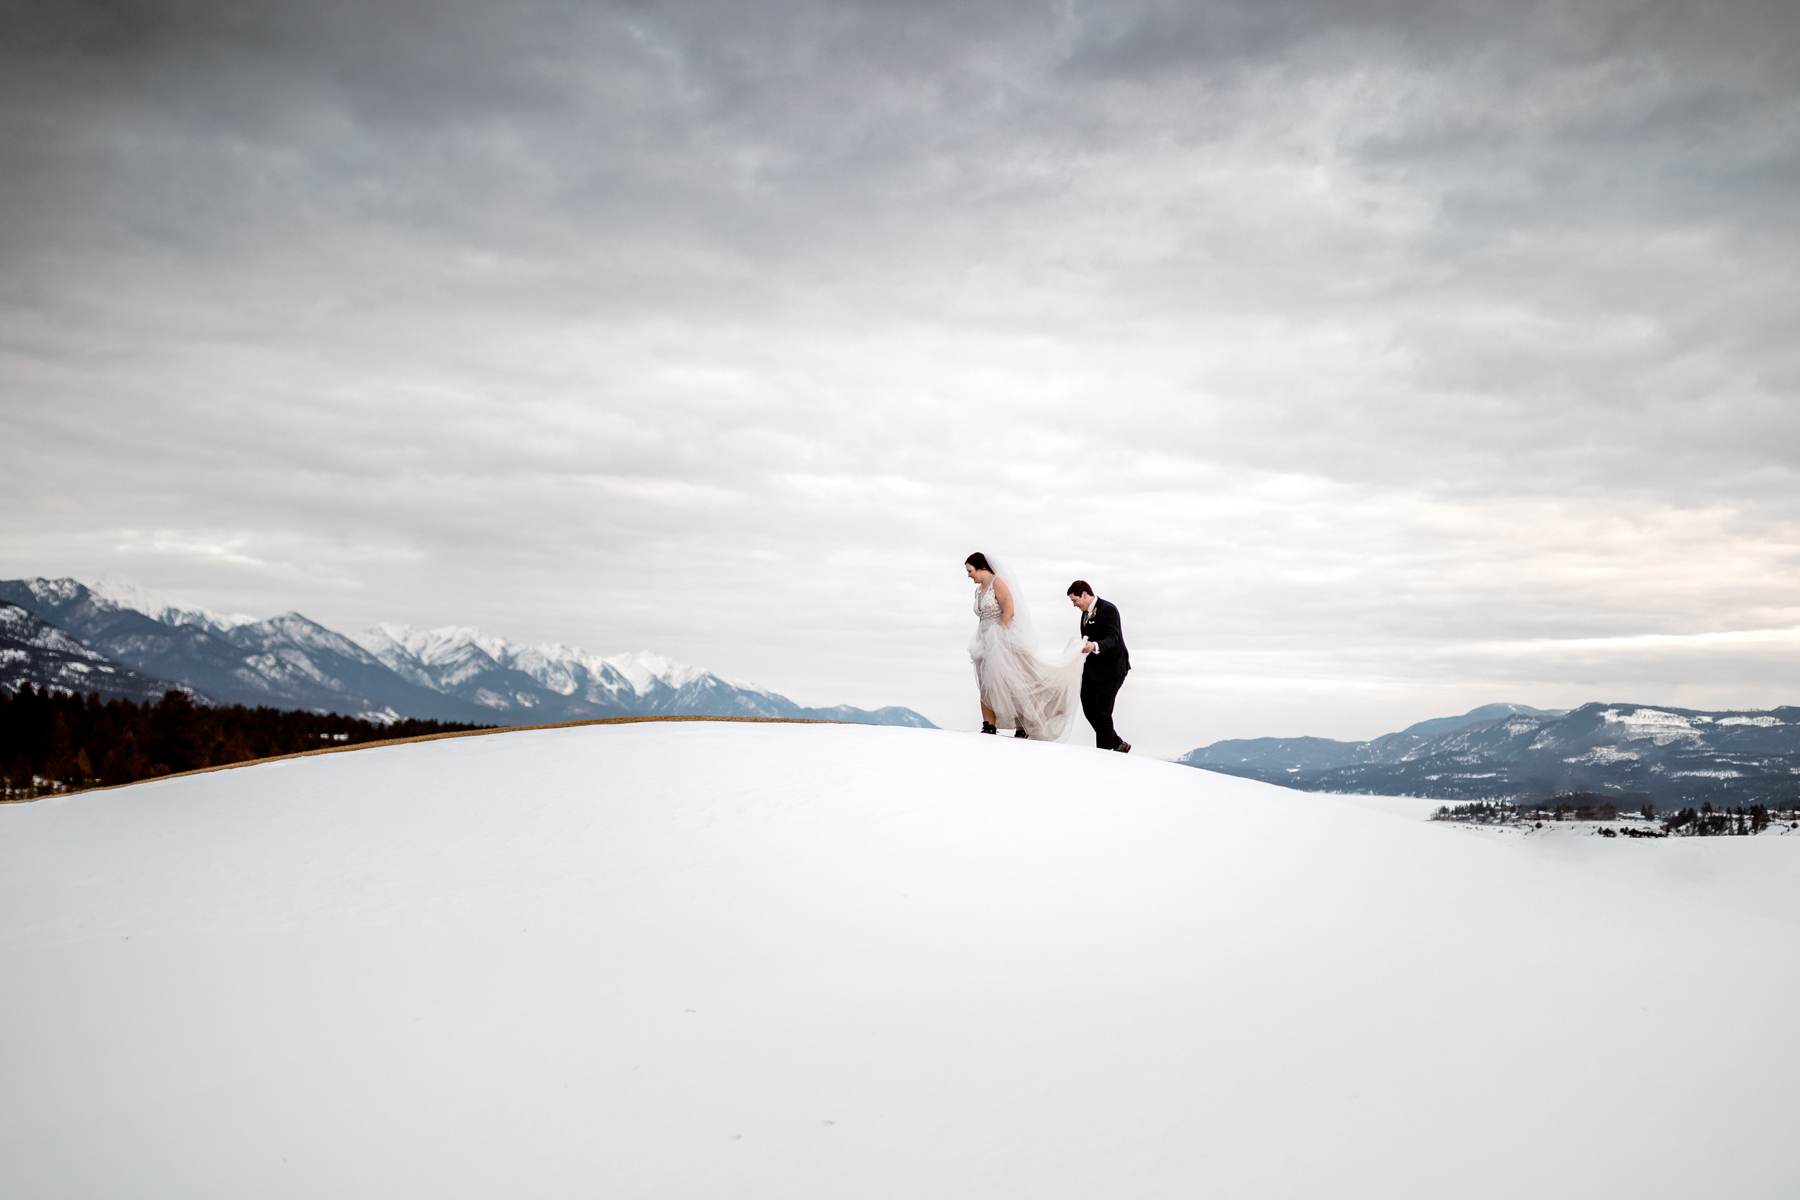 Invermere Wedding Photographers at Eagle Ranch Golf Club and Panorama Ski Resort